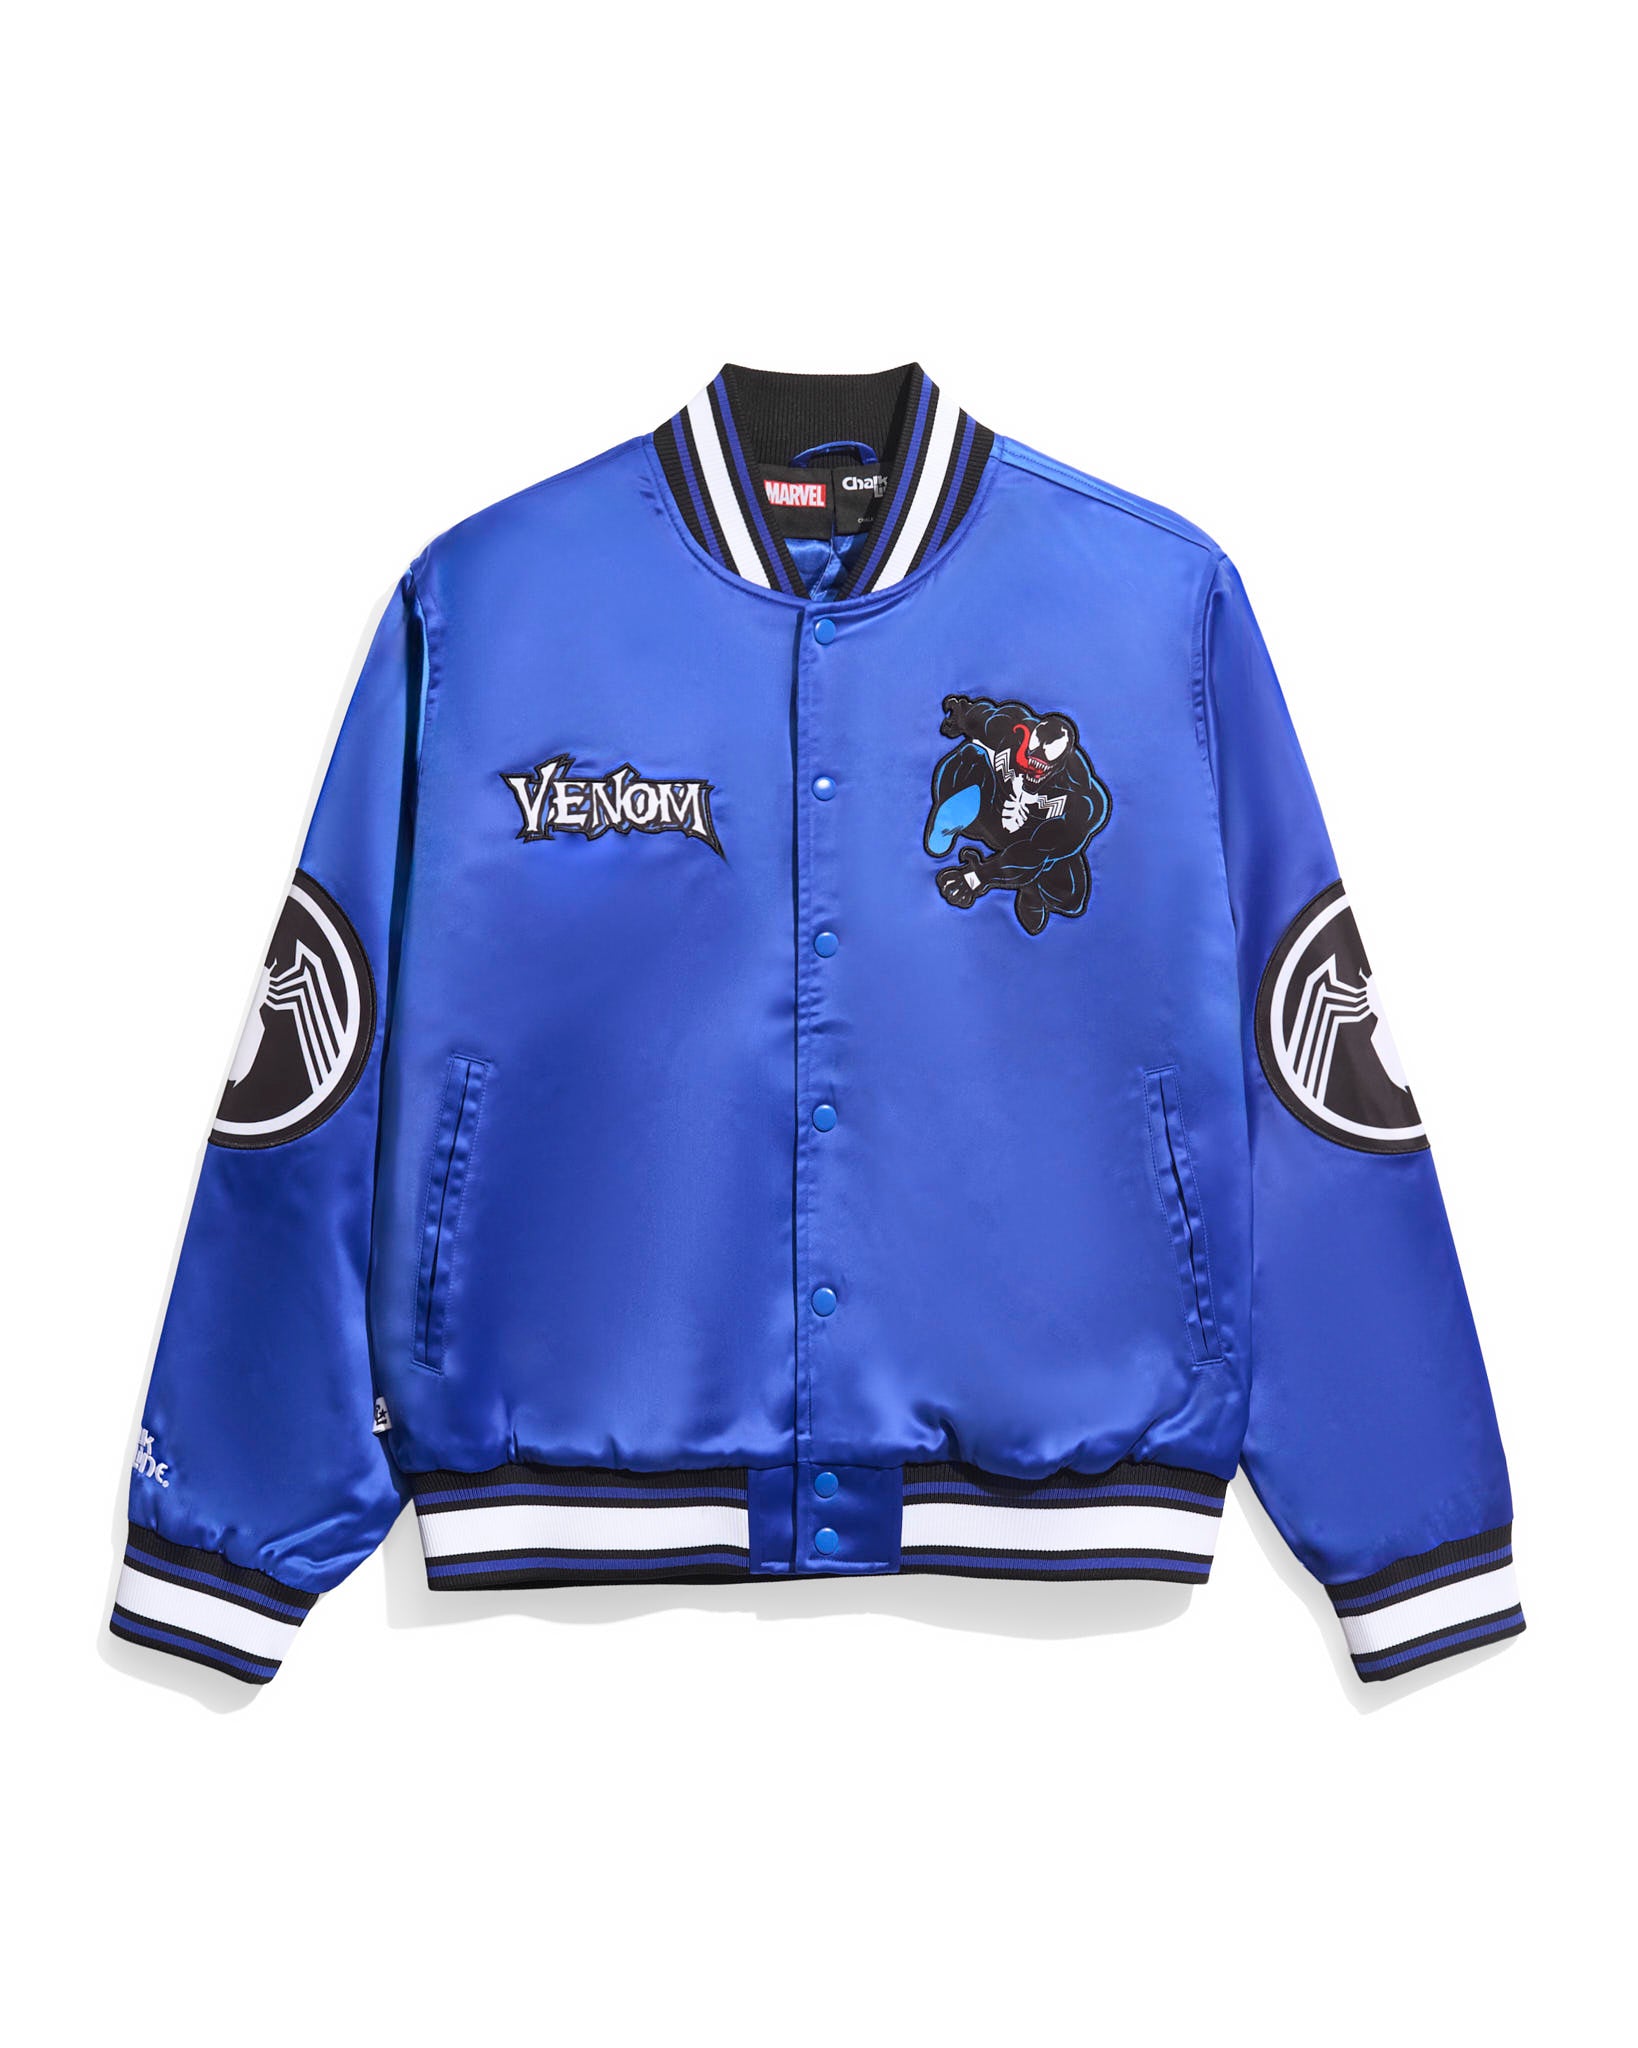 Chalk Line Apparel - Officially licensed Chalk Line Jackets